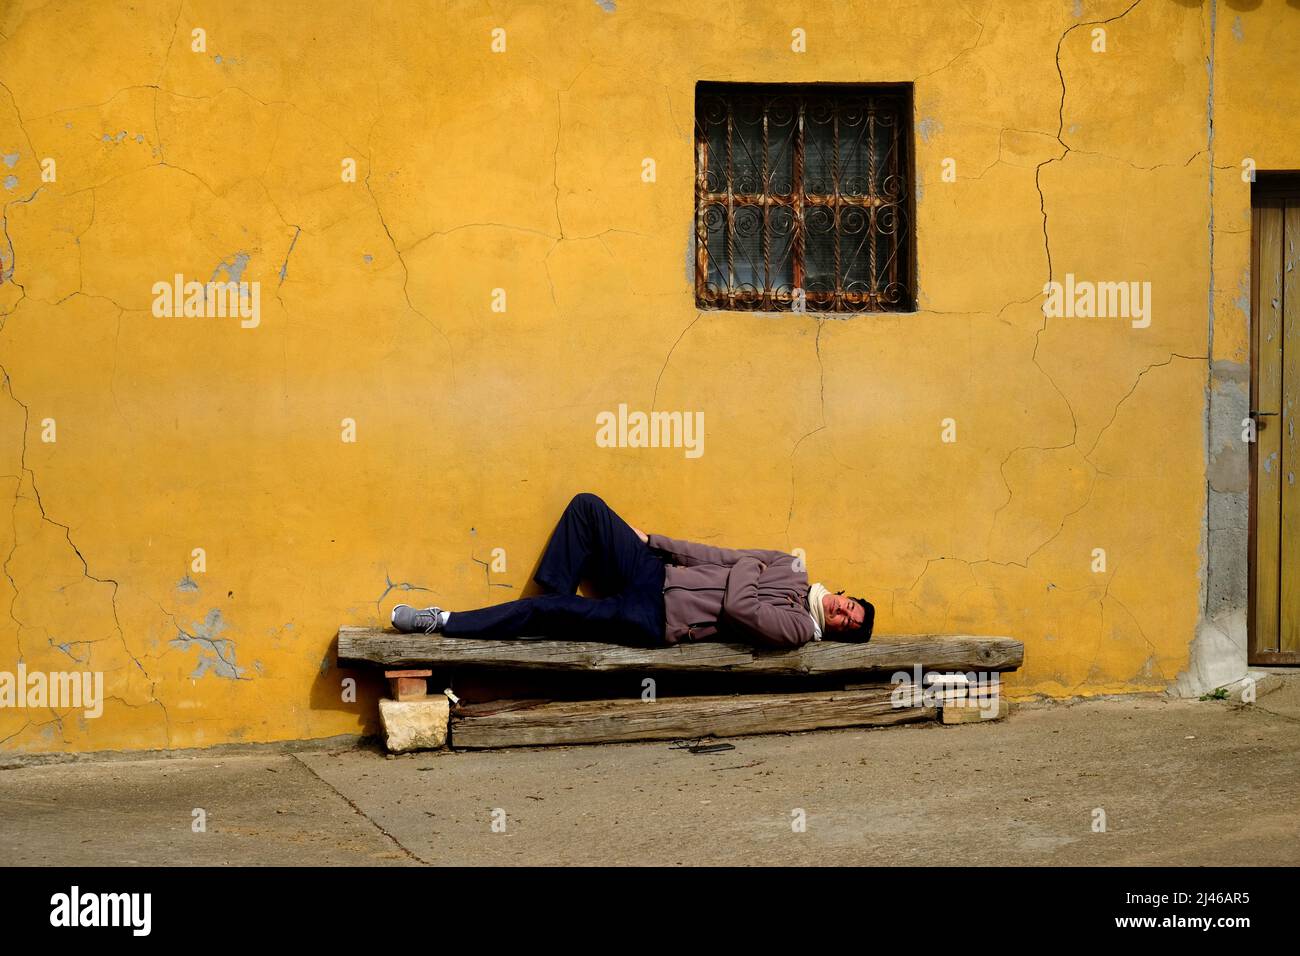 A man sleeps happily on a rough wooden bench in the sunshine beside a yellow wall in Becerril de Campos, near Palancia, Castile and León, Spain Stock Photo